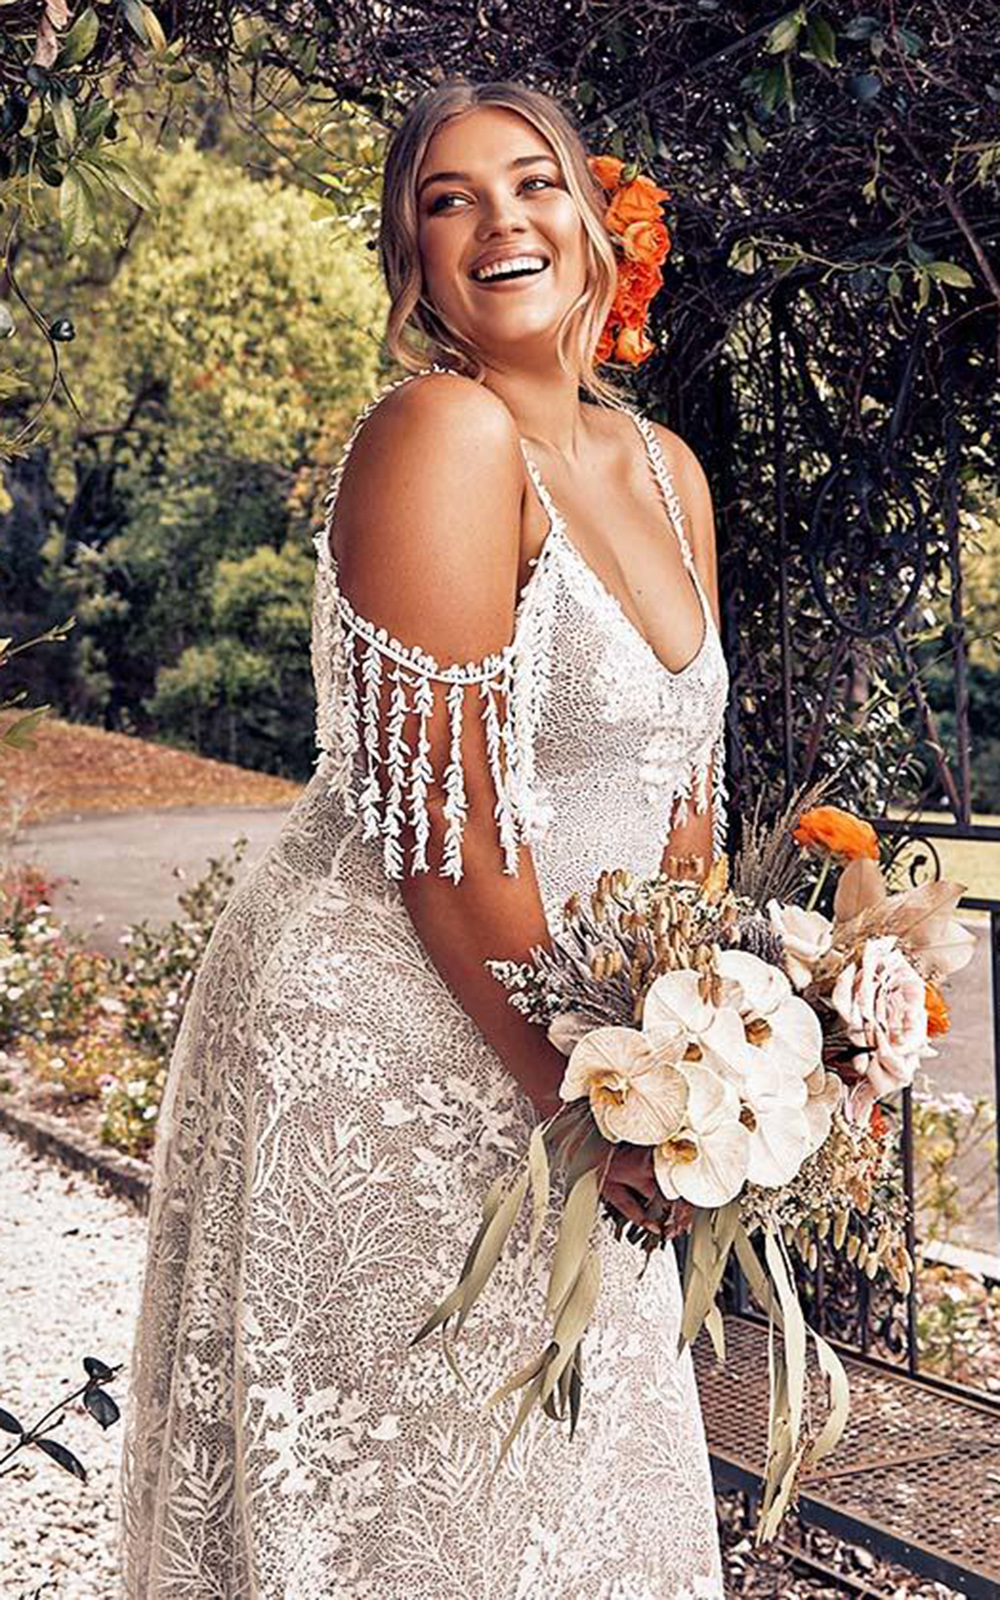 Fishtail Wedding Dresses - The Trend We Can't Stop Obsessing Over